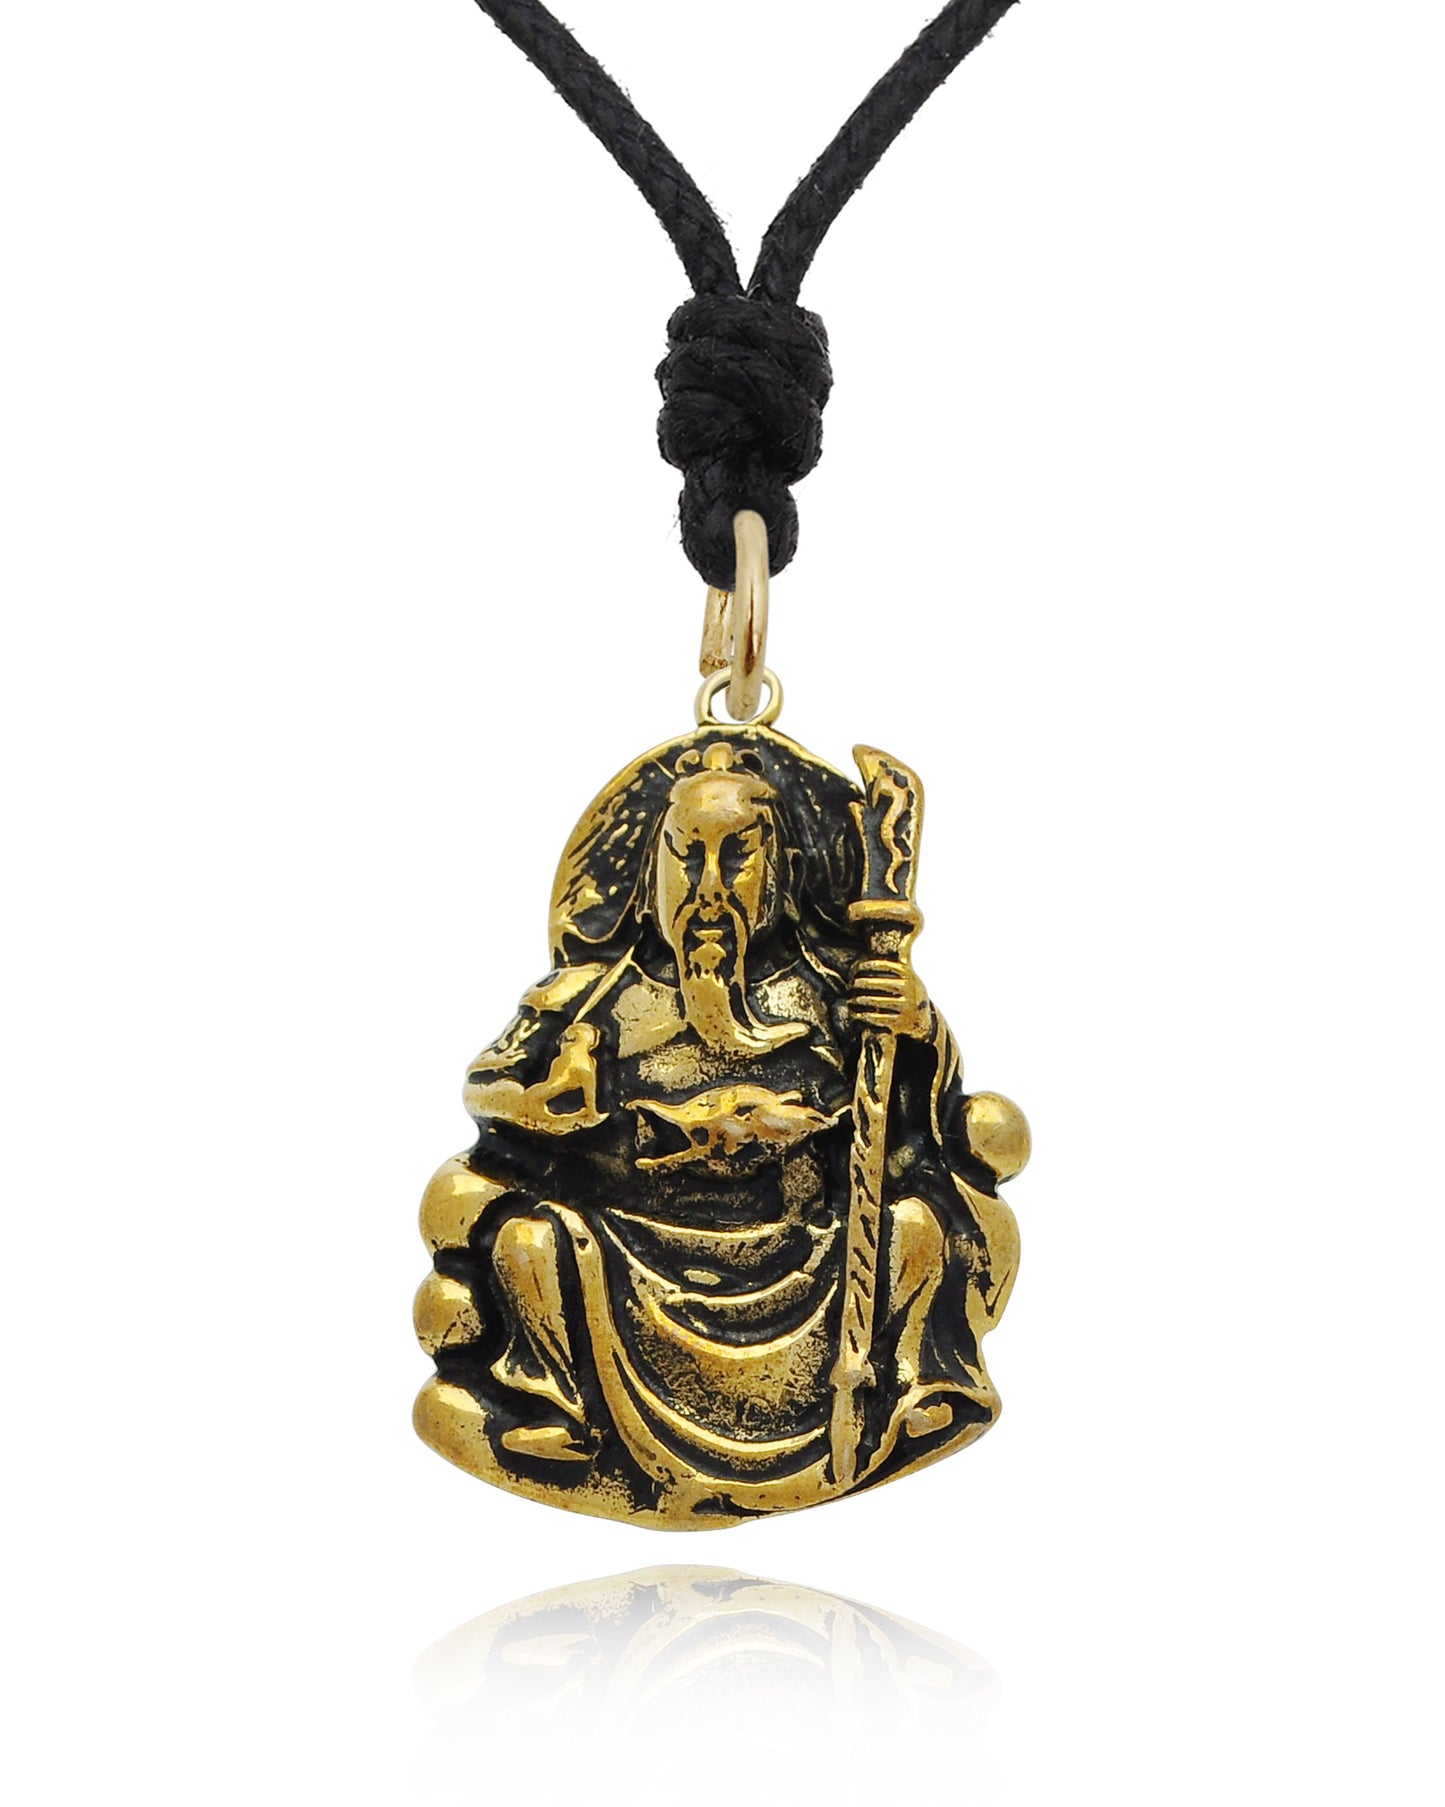 Chinese Warrior Yue Fei Brass Gold Charm Necklace Pendant Jewelry